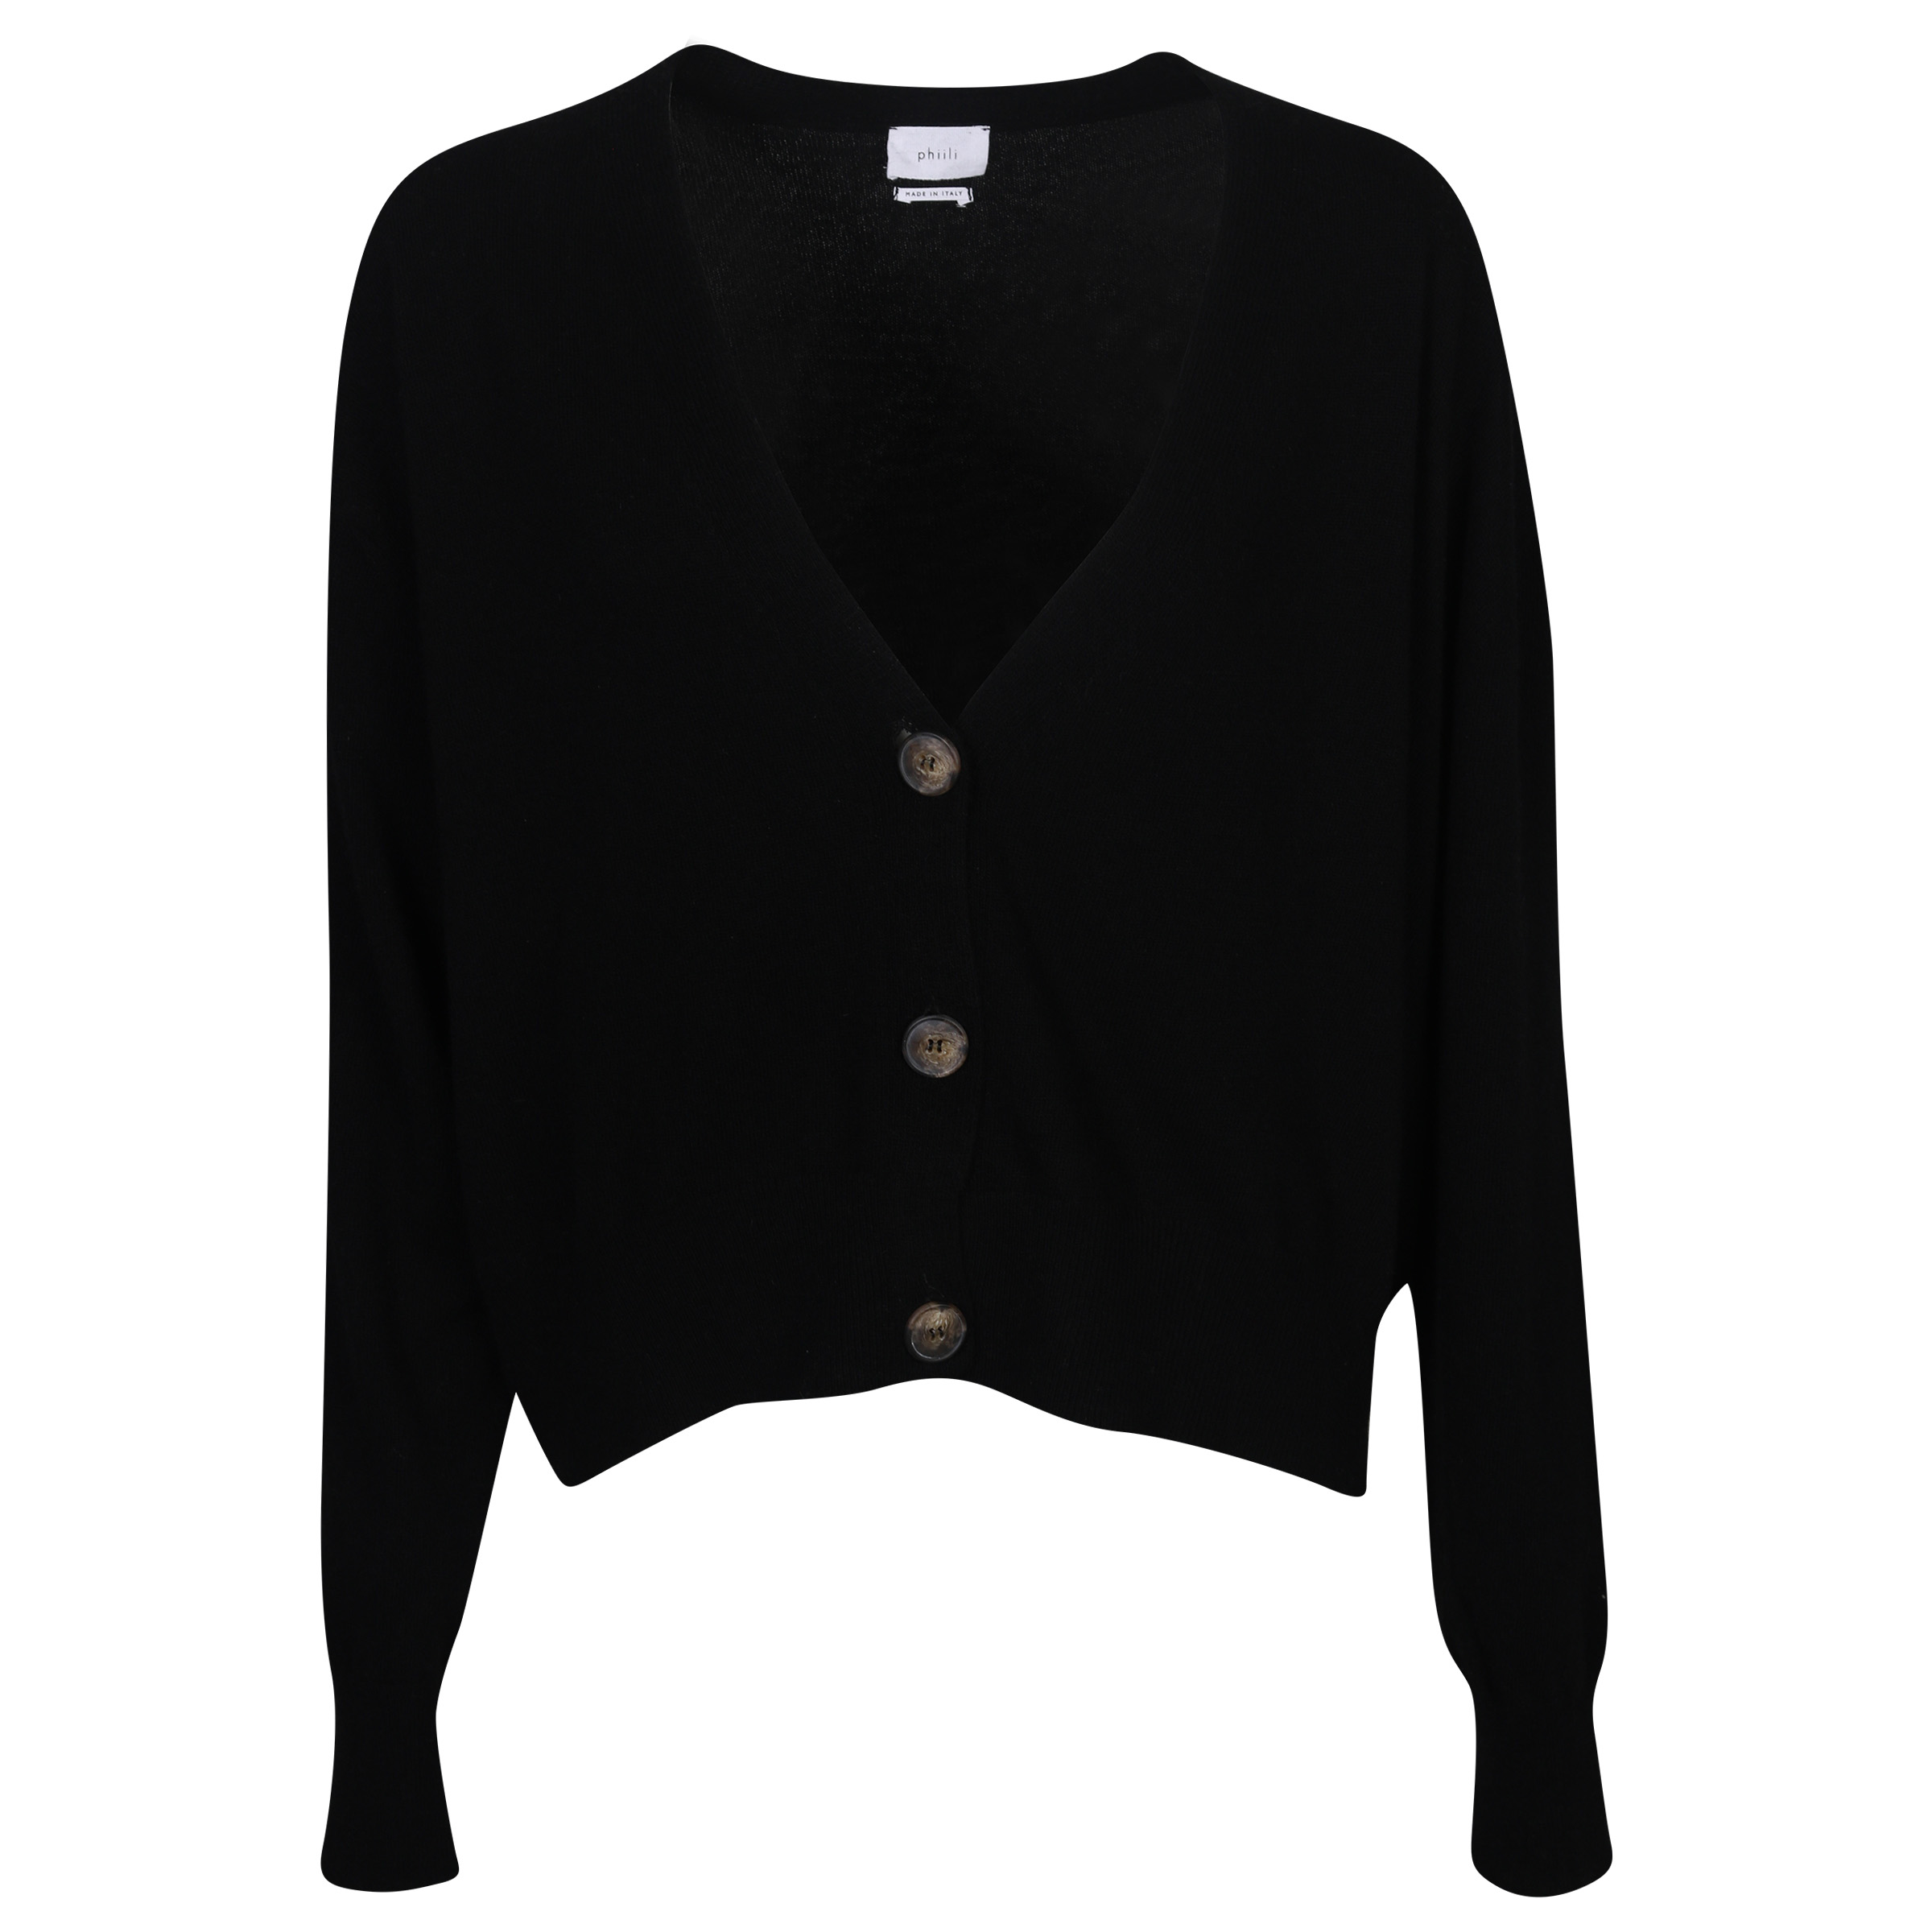 Phiili Recycled Cashmere Cardigan in Black